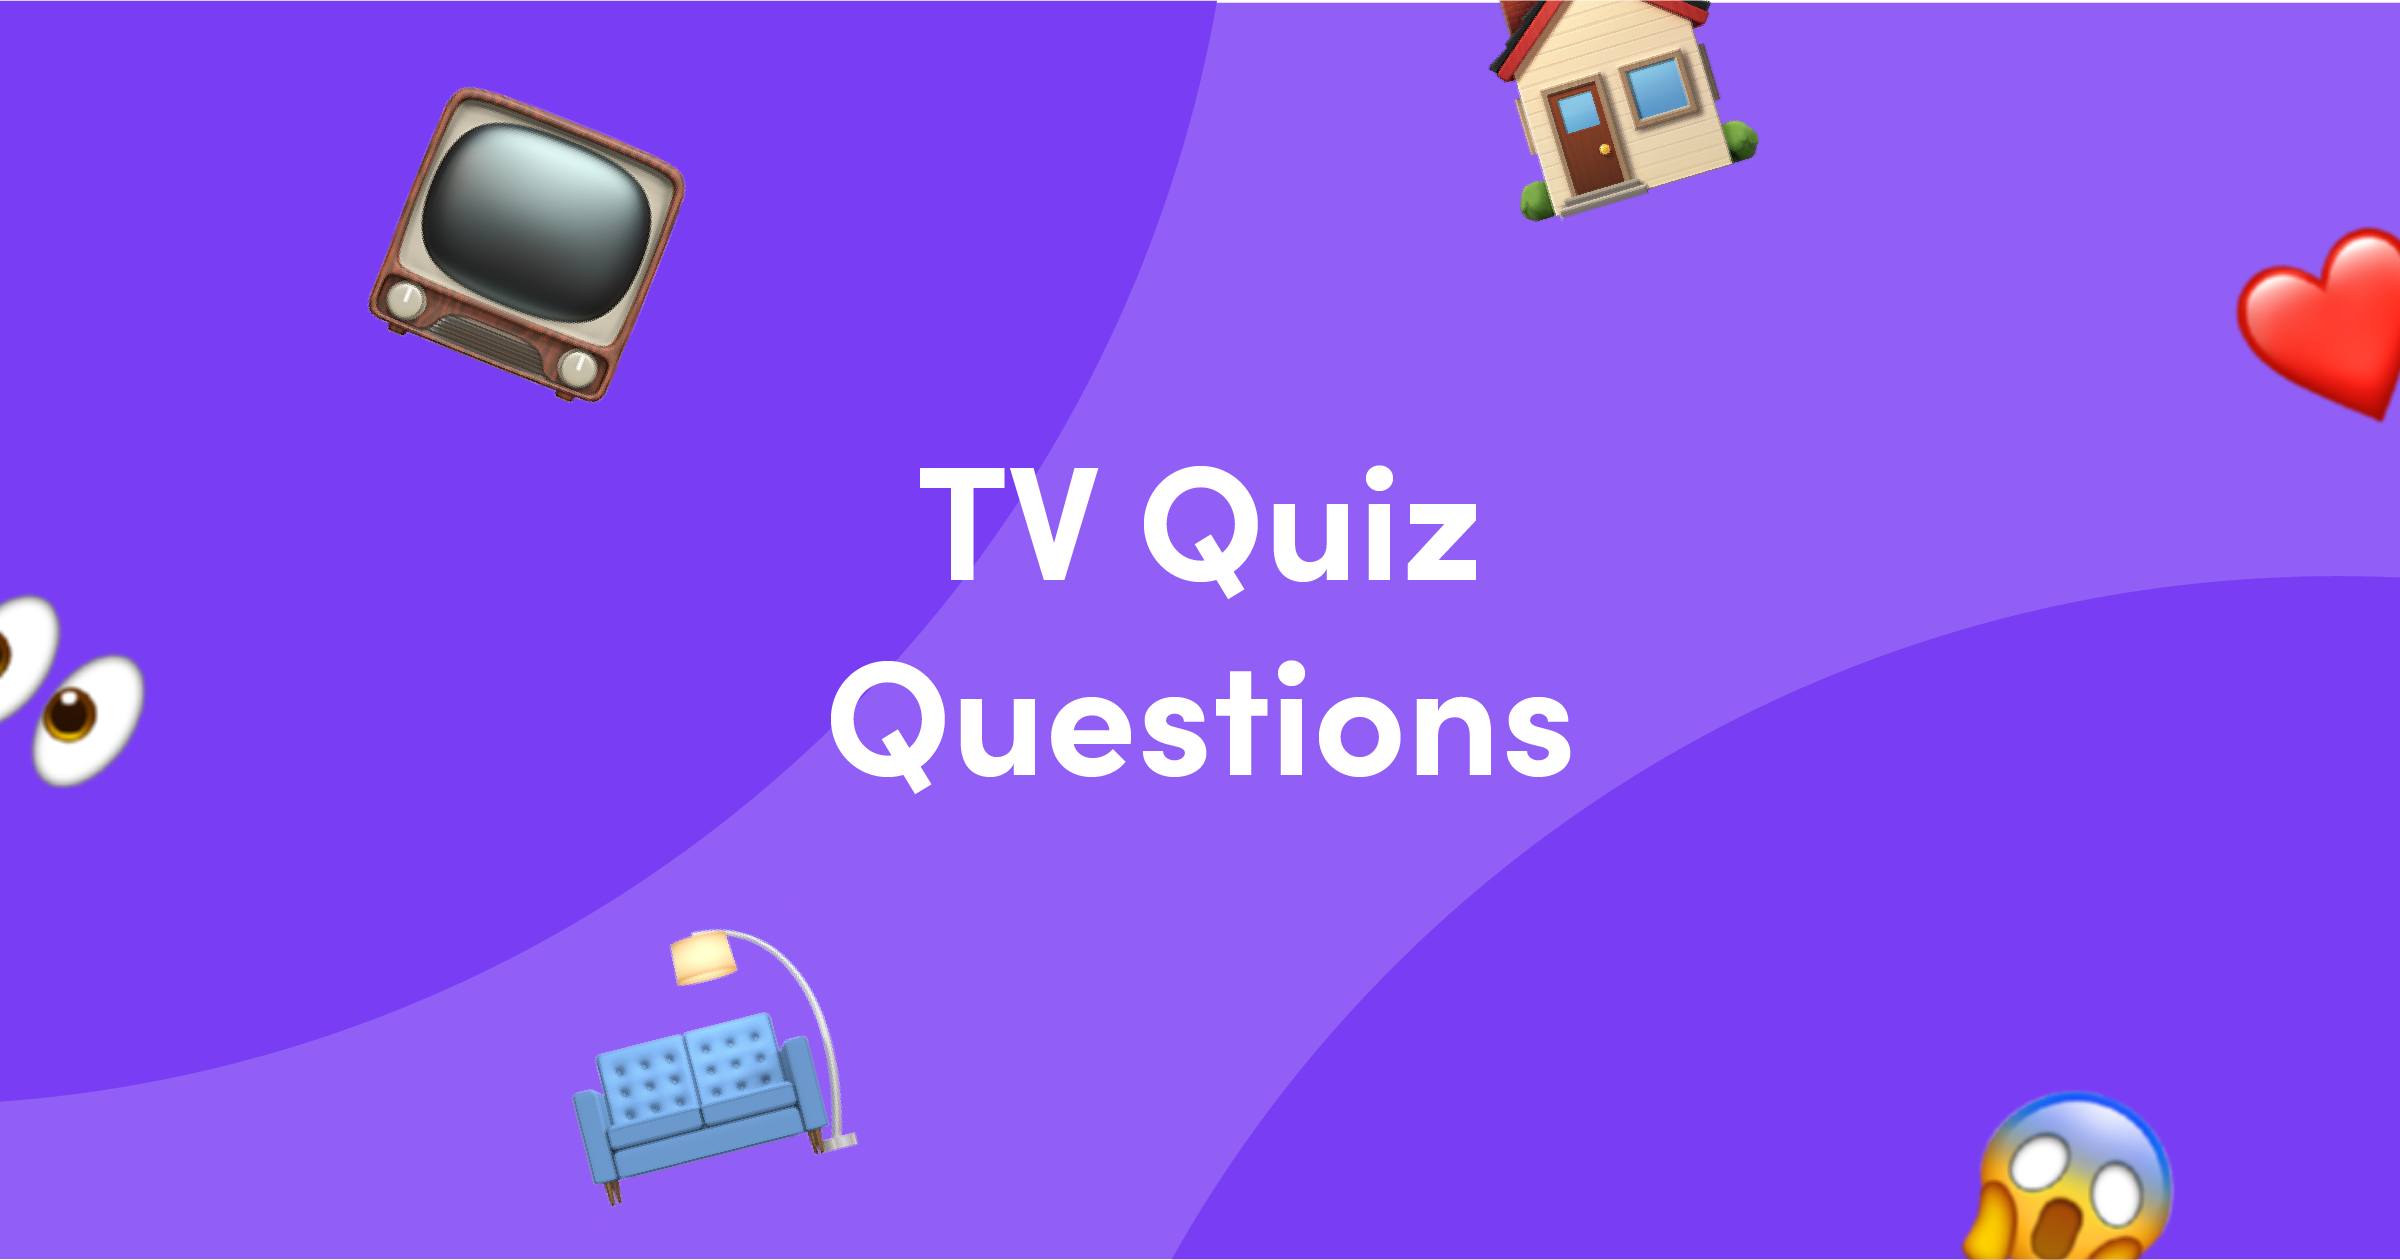 emojis on purple background for TV quiz questions and answers